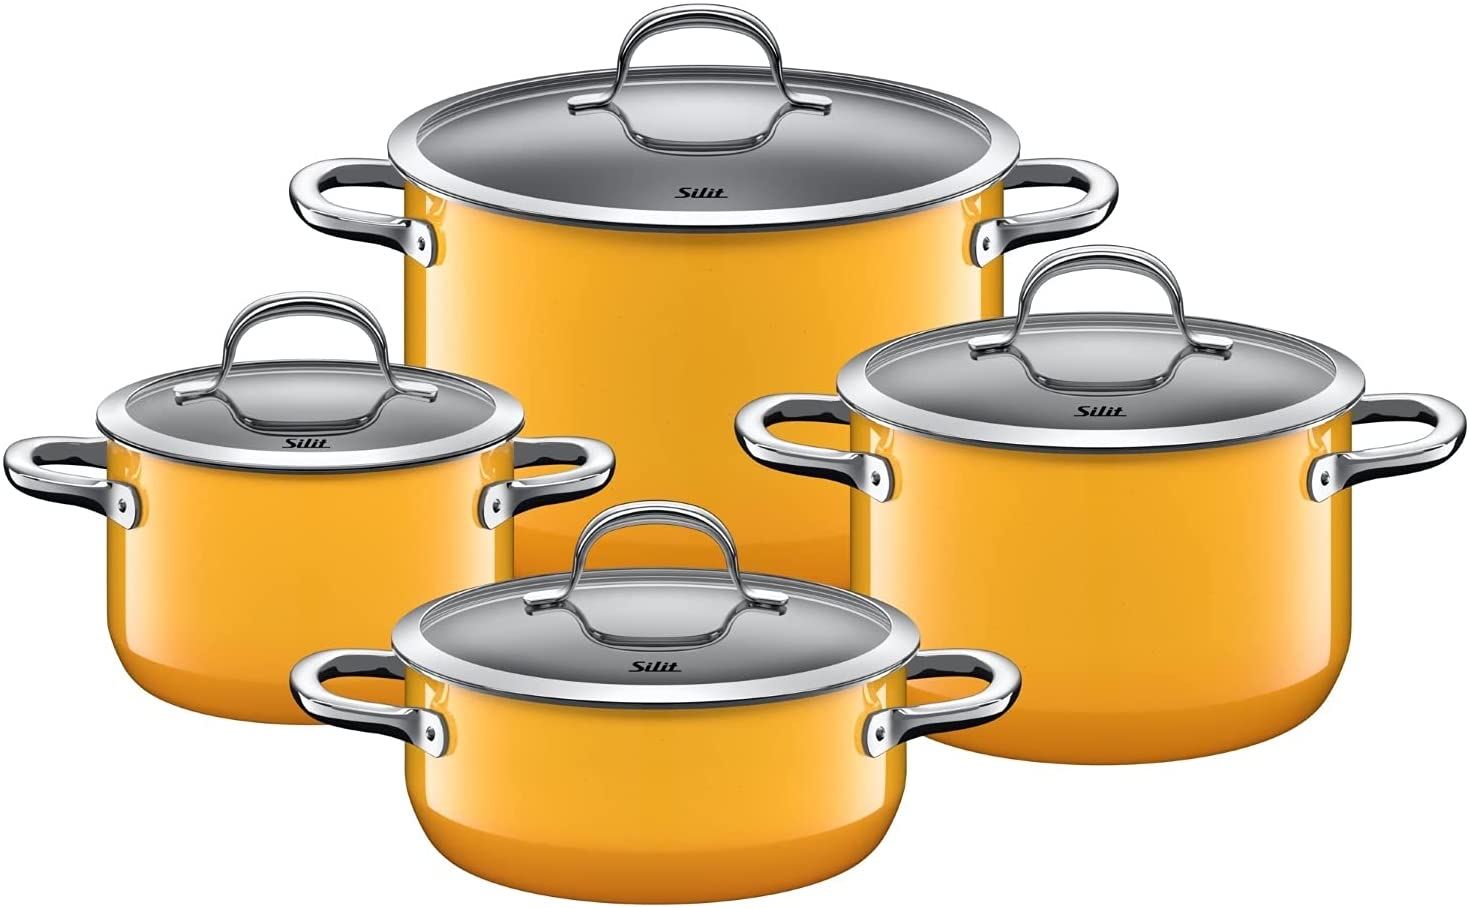 Silit Passion Yellow 4-Piece Induction Cooking Pot Set with Glass Lid, Silargan Functional Ceramic, Induction Pots Set, Nickel-Free, Yellow